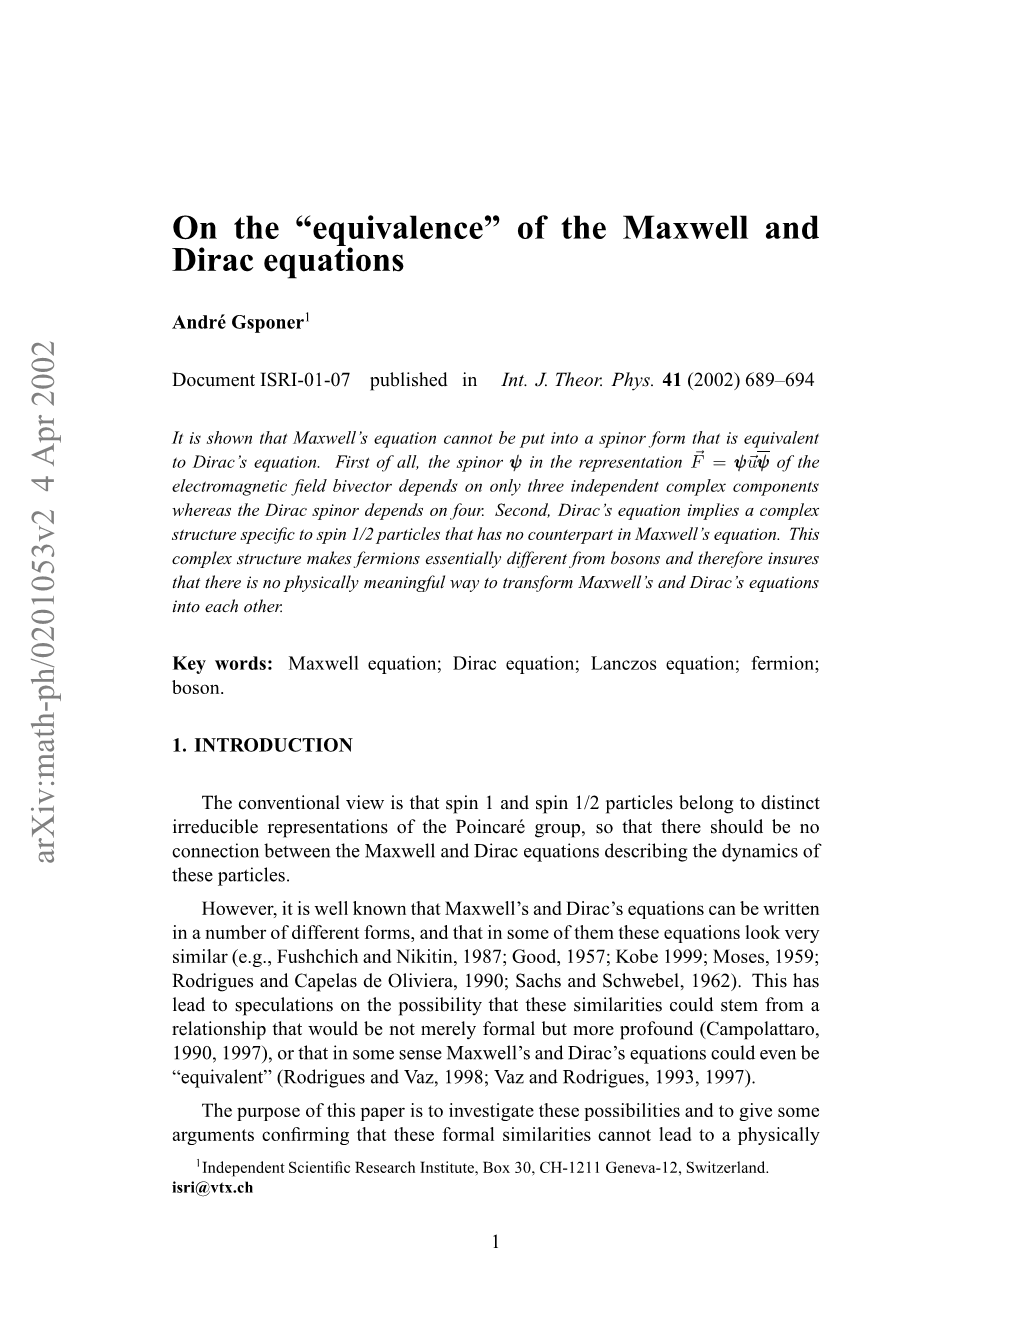 On the “Equivalence” of the Maxwell and Dirac Equations